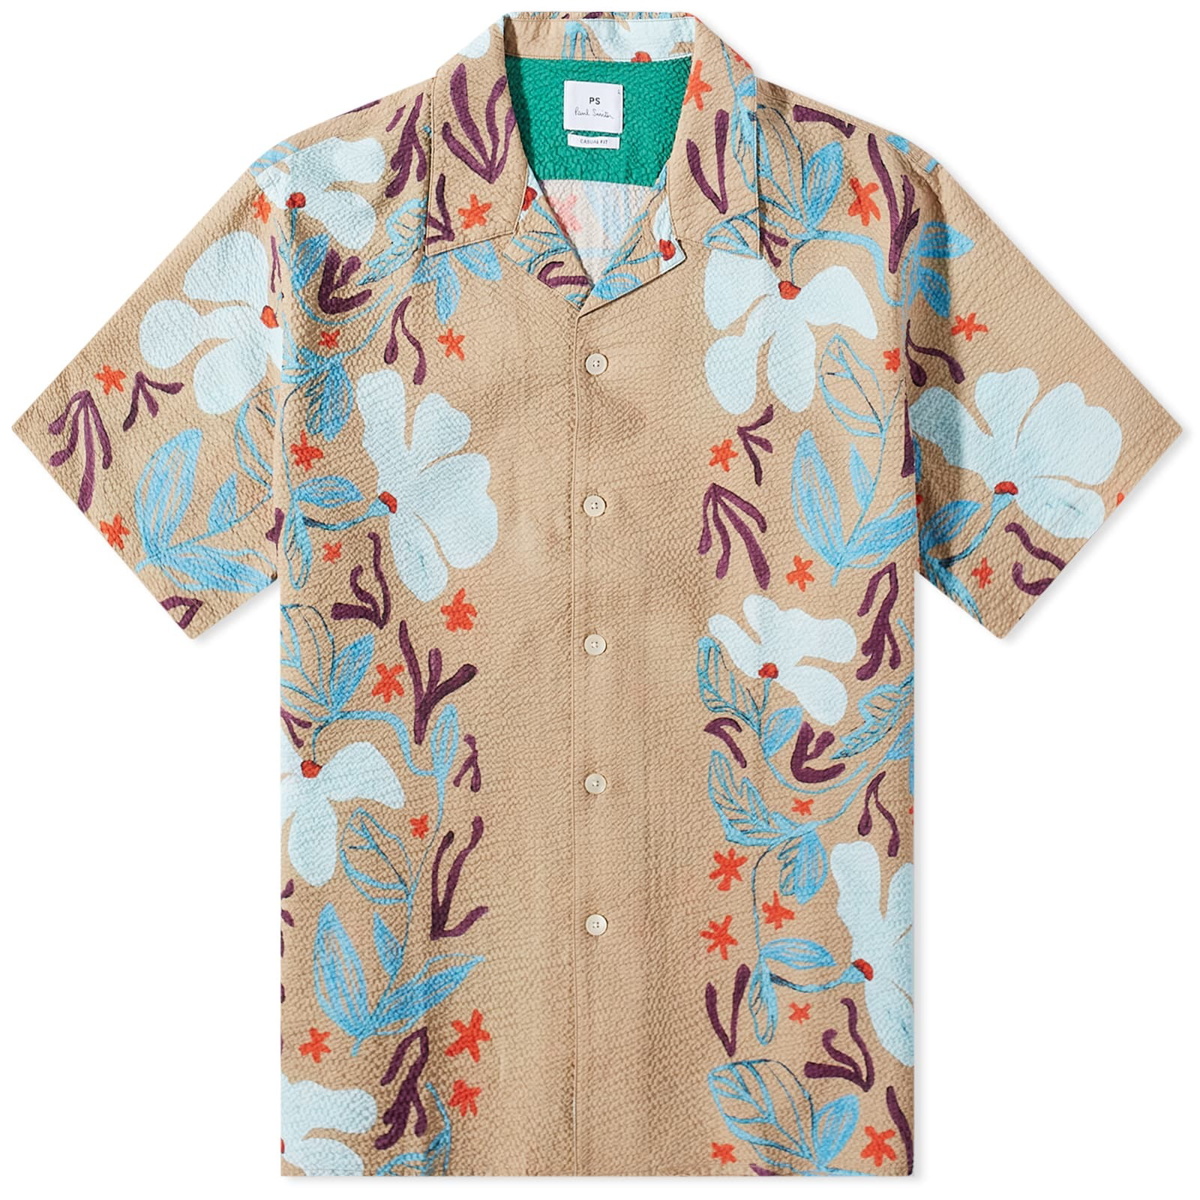 Paul Smith Men's Sea and Shells Vacation Shirt in Brown Paul Smith